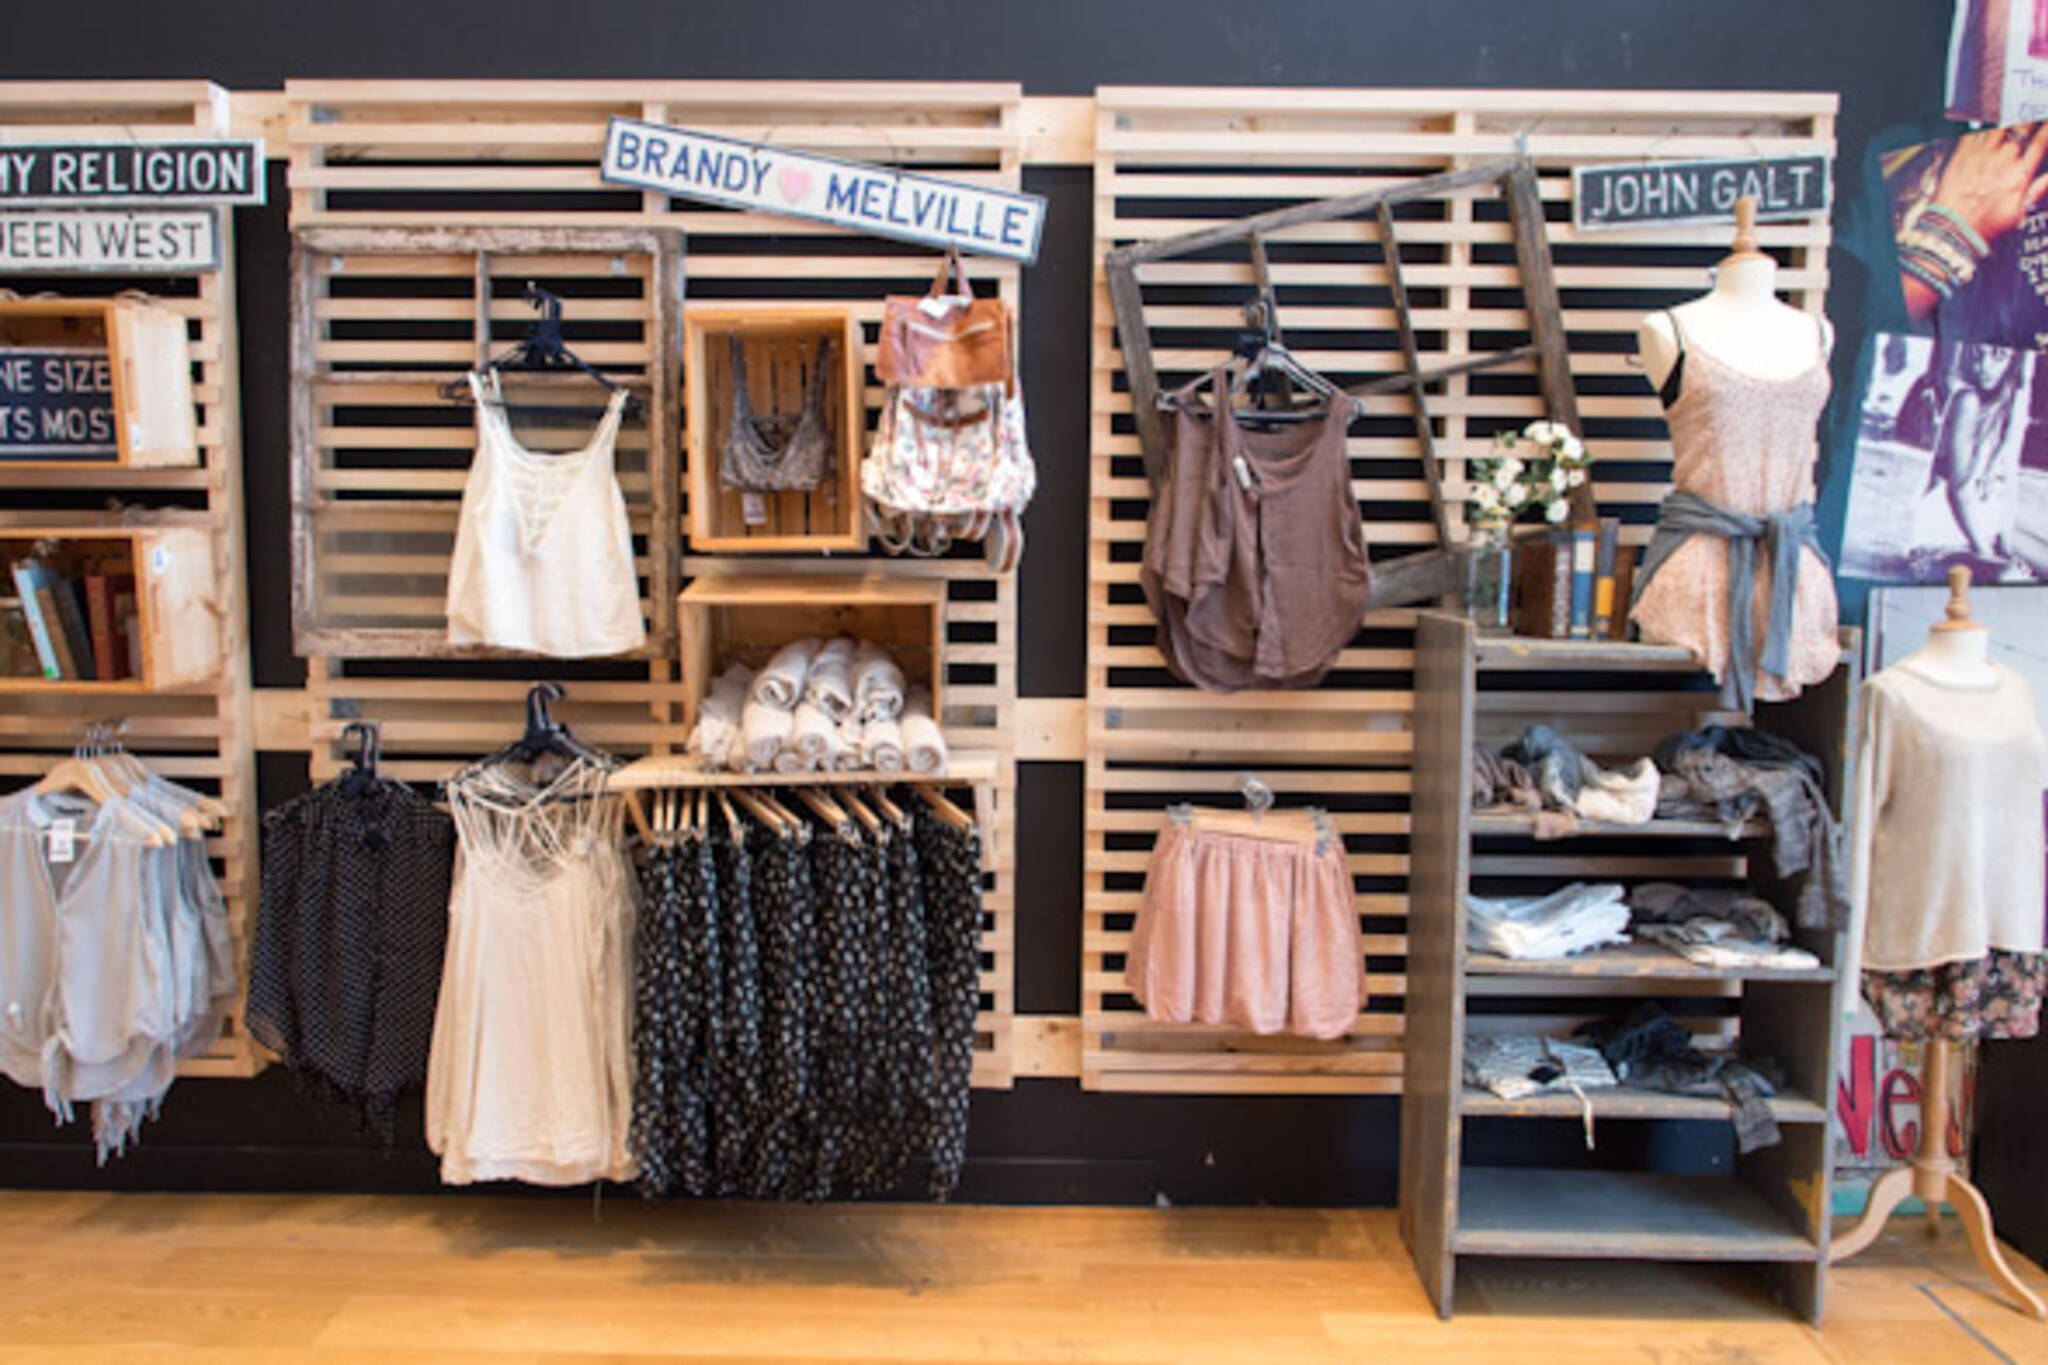 Brandy Melville Store  Brandy melville, Brandy melville stores